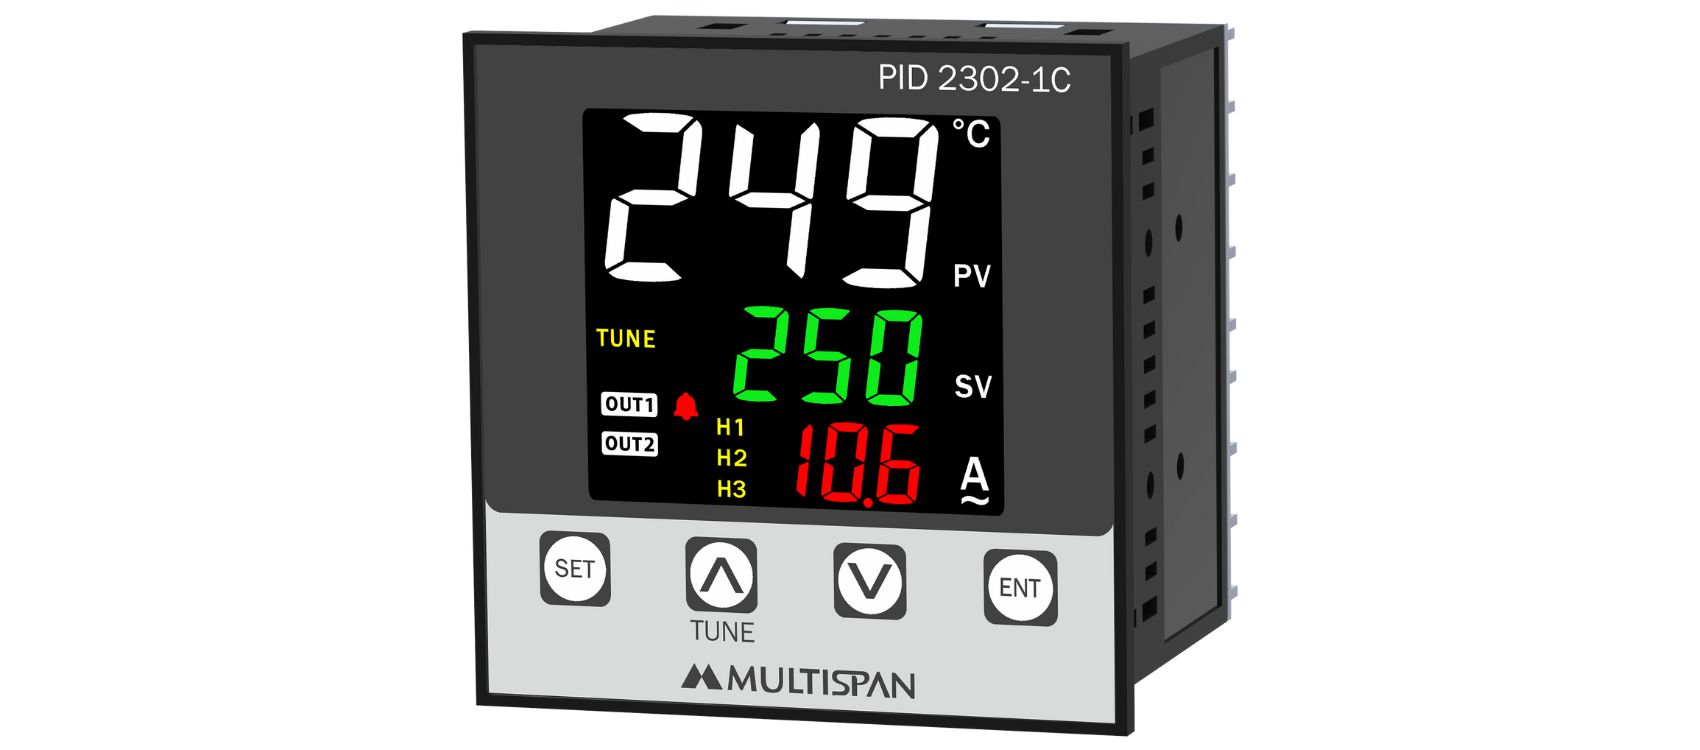 PID-2302-1C-PID Controller With Ampere Indicator - 2 OUTPUT - product image